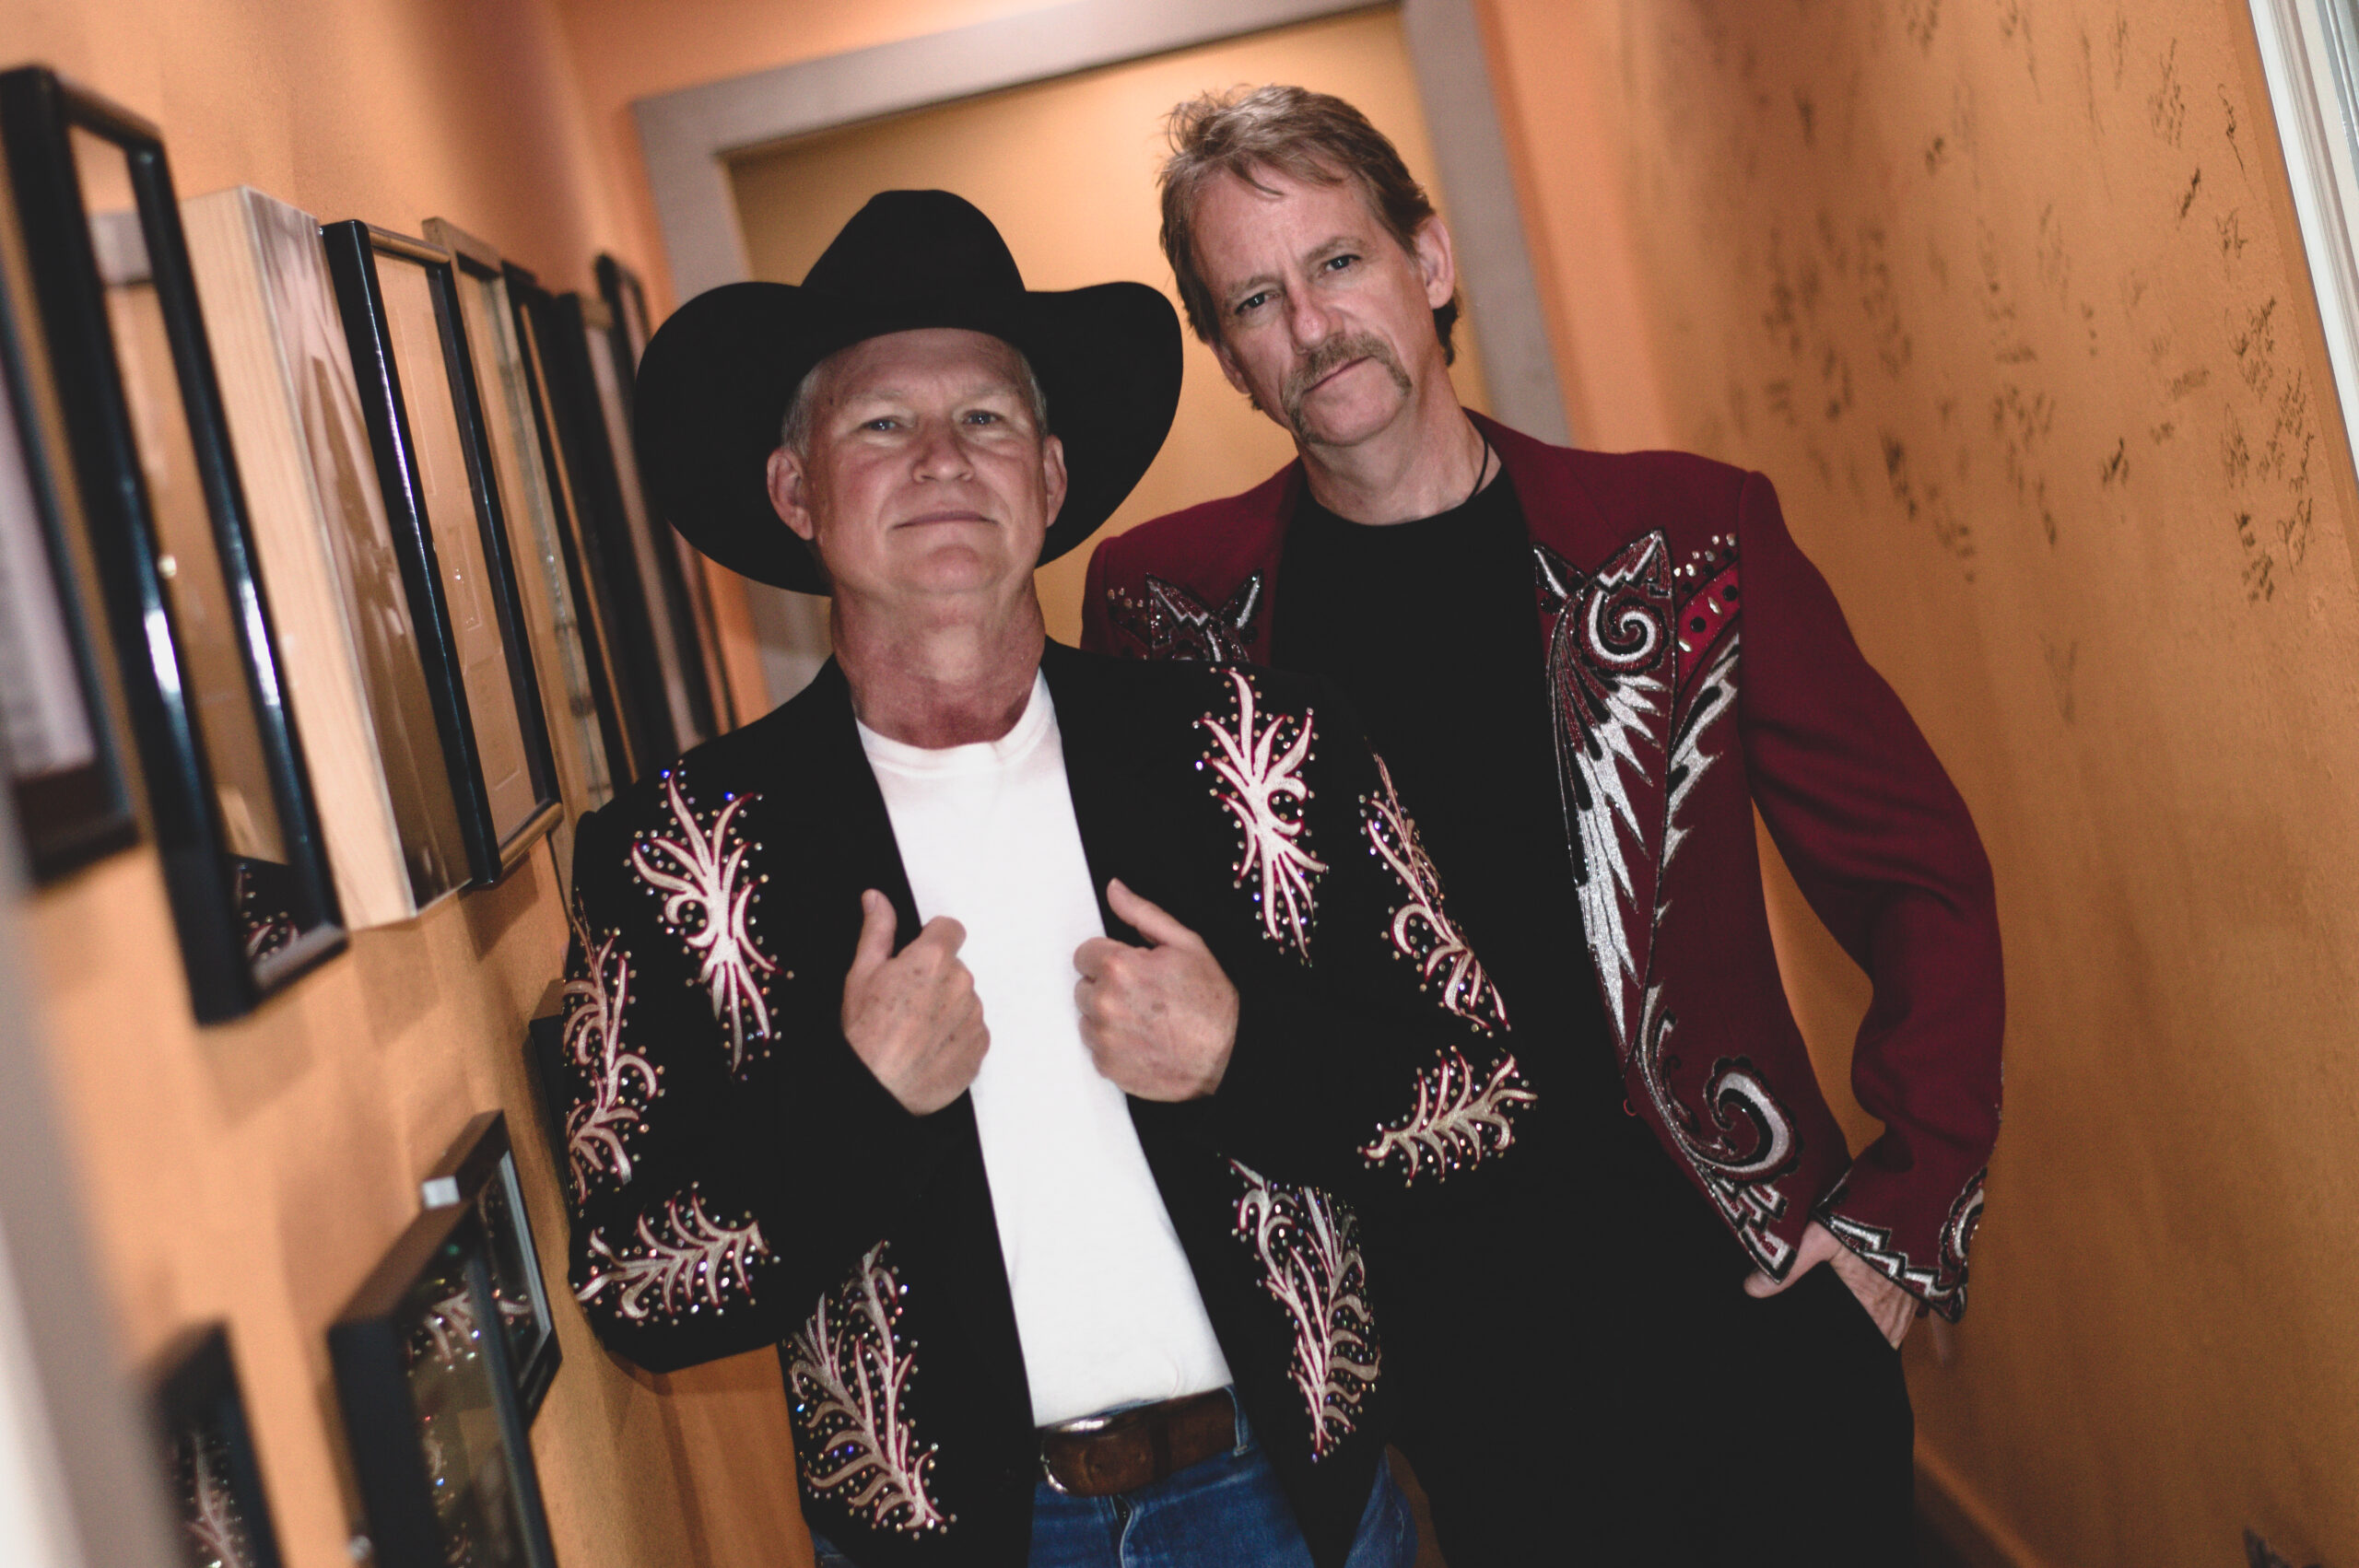 Locals Weaver and Davis lend voices to NE Tex arts as The Heroes musical act